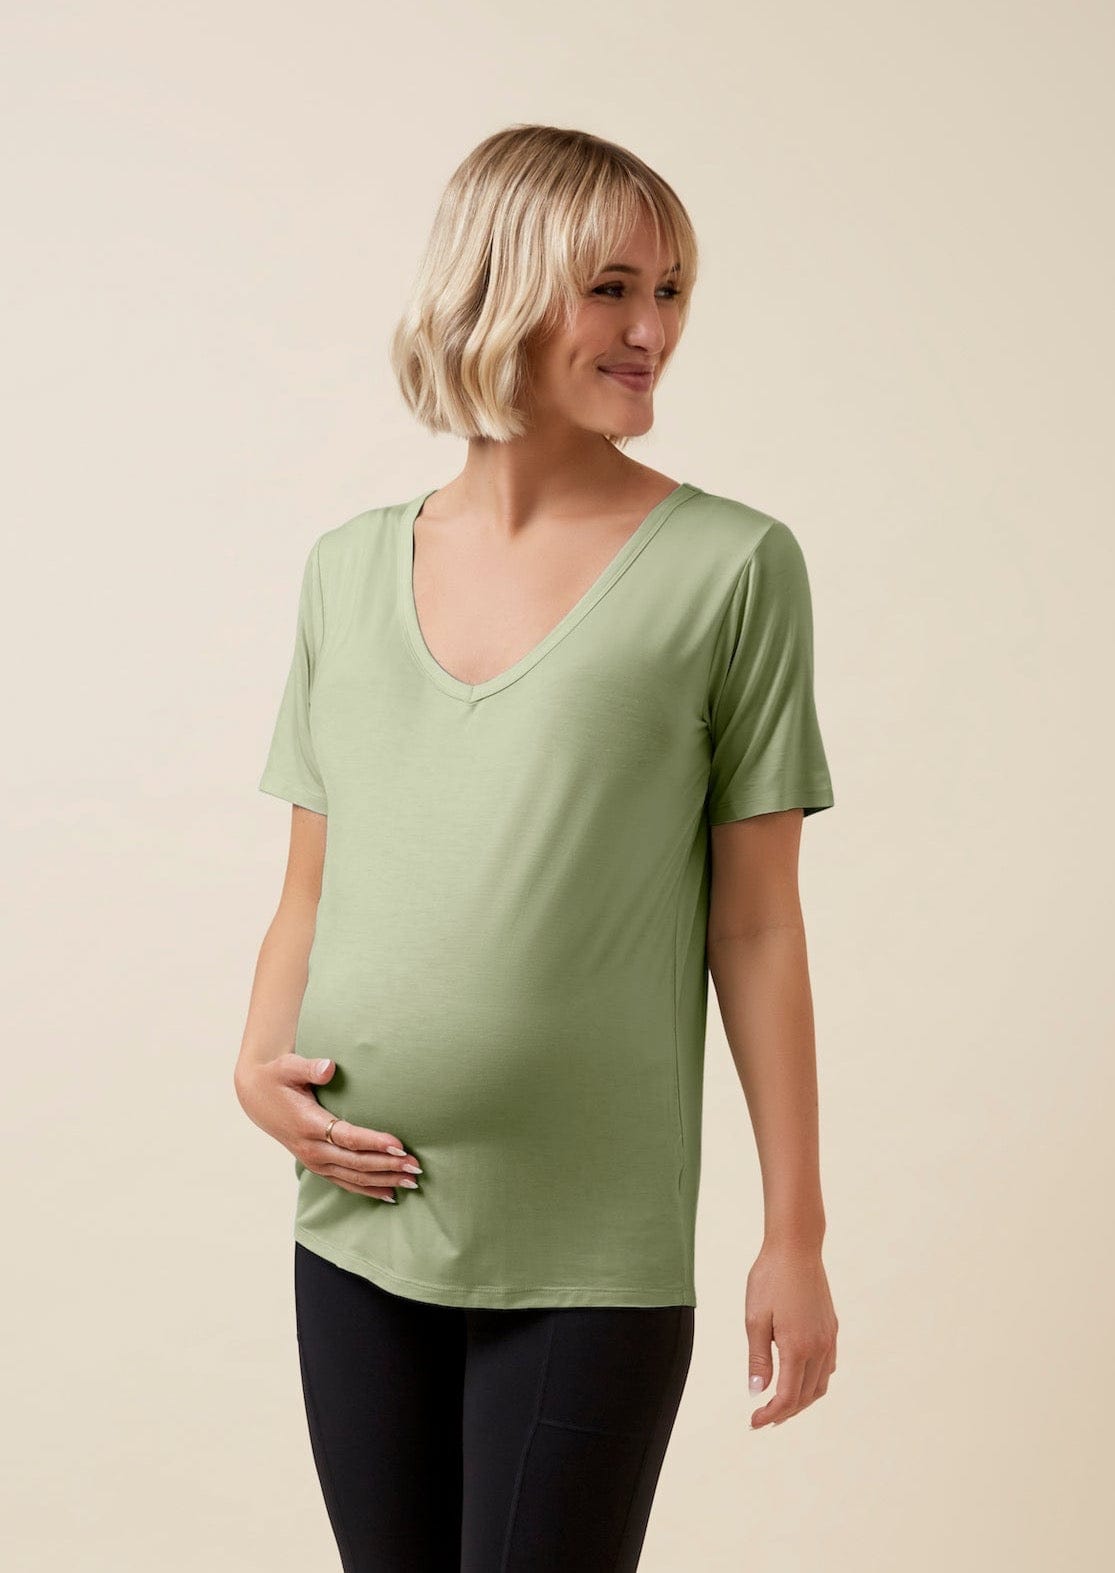 Thery Group TEE Calm Khaki The Me Slouch bamboo Tee -side view pregnant mother